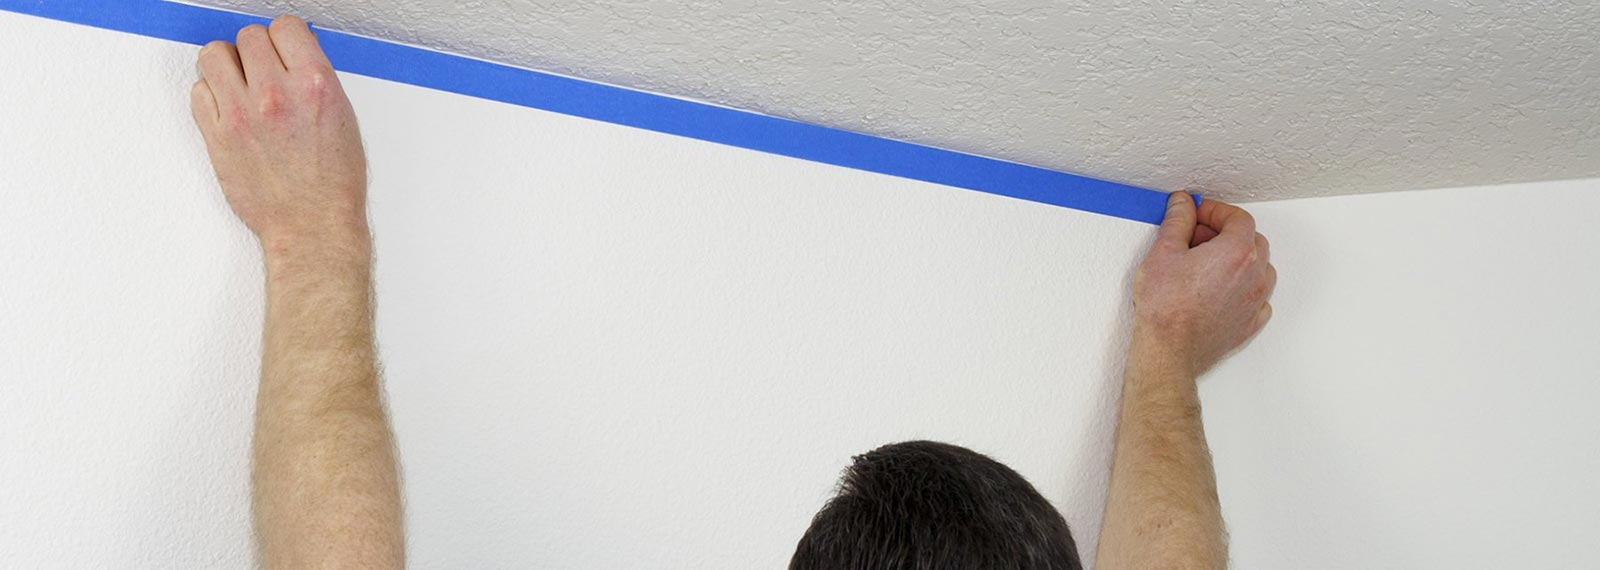 How to fix paint that has ripped off wal